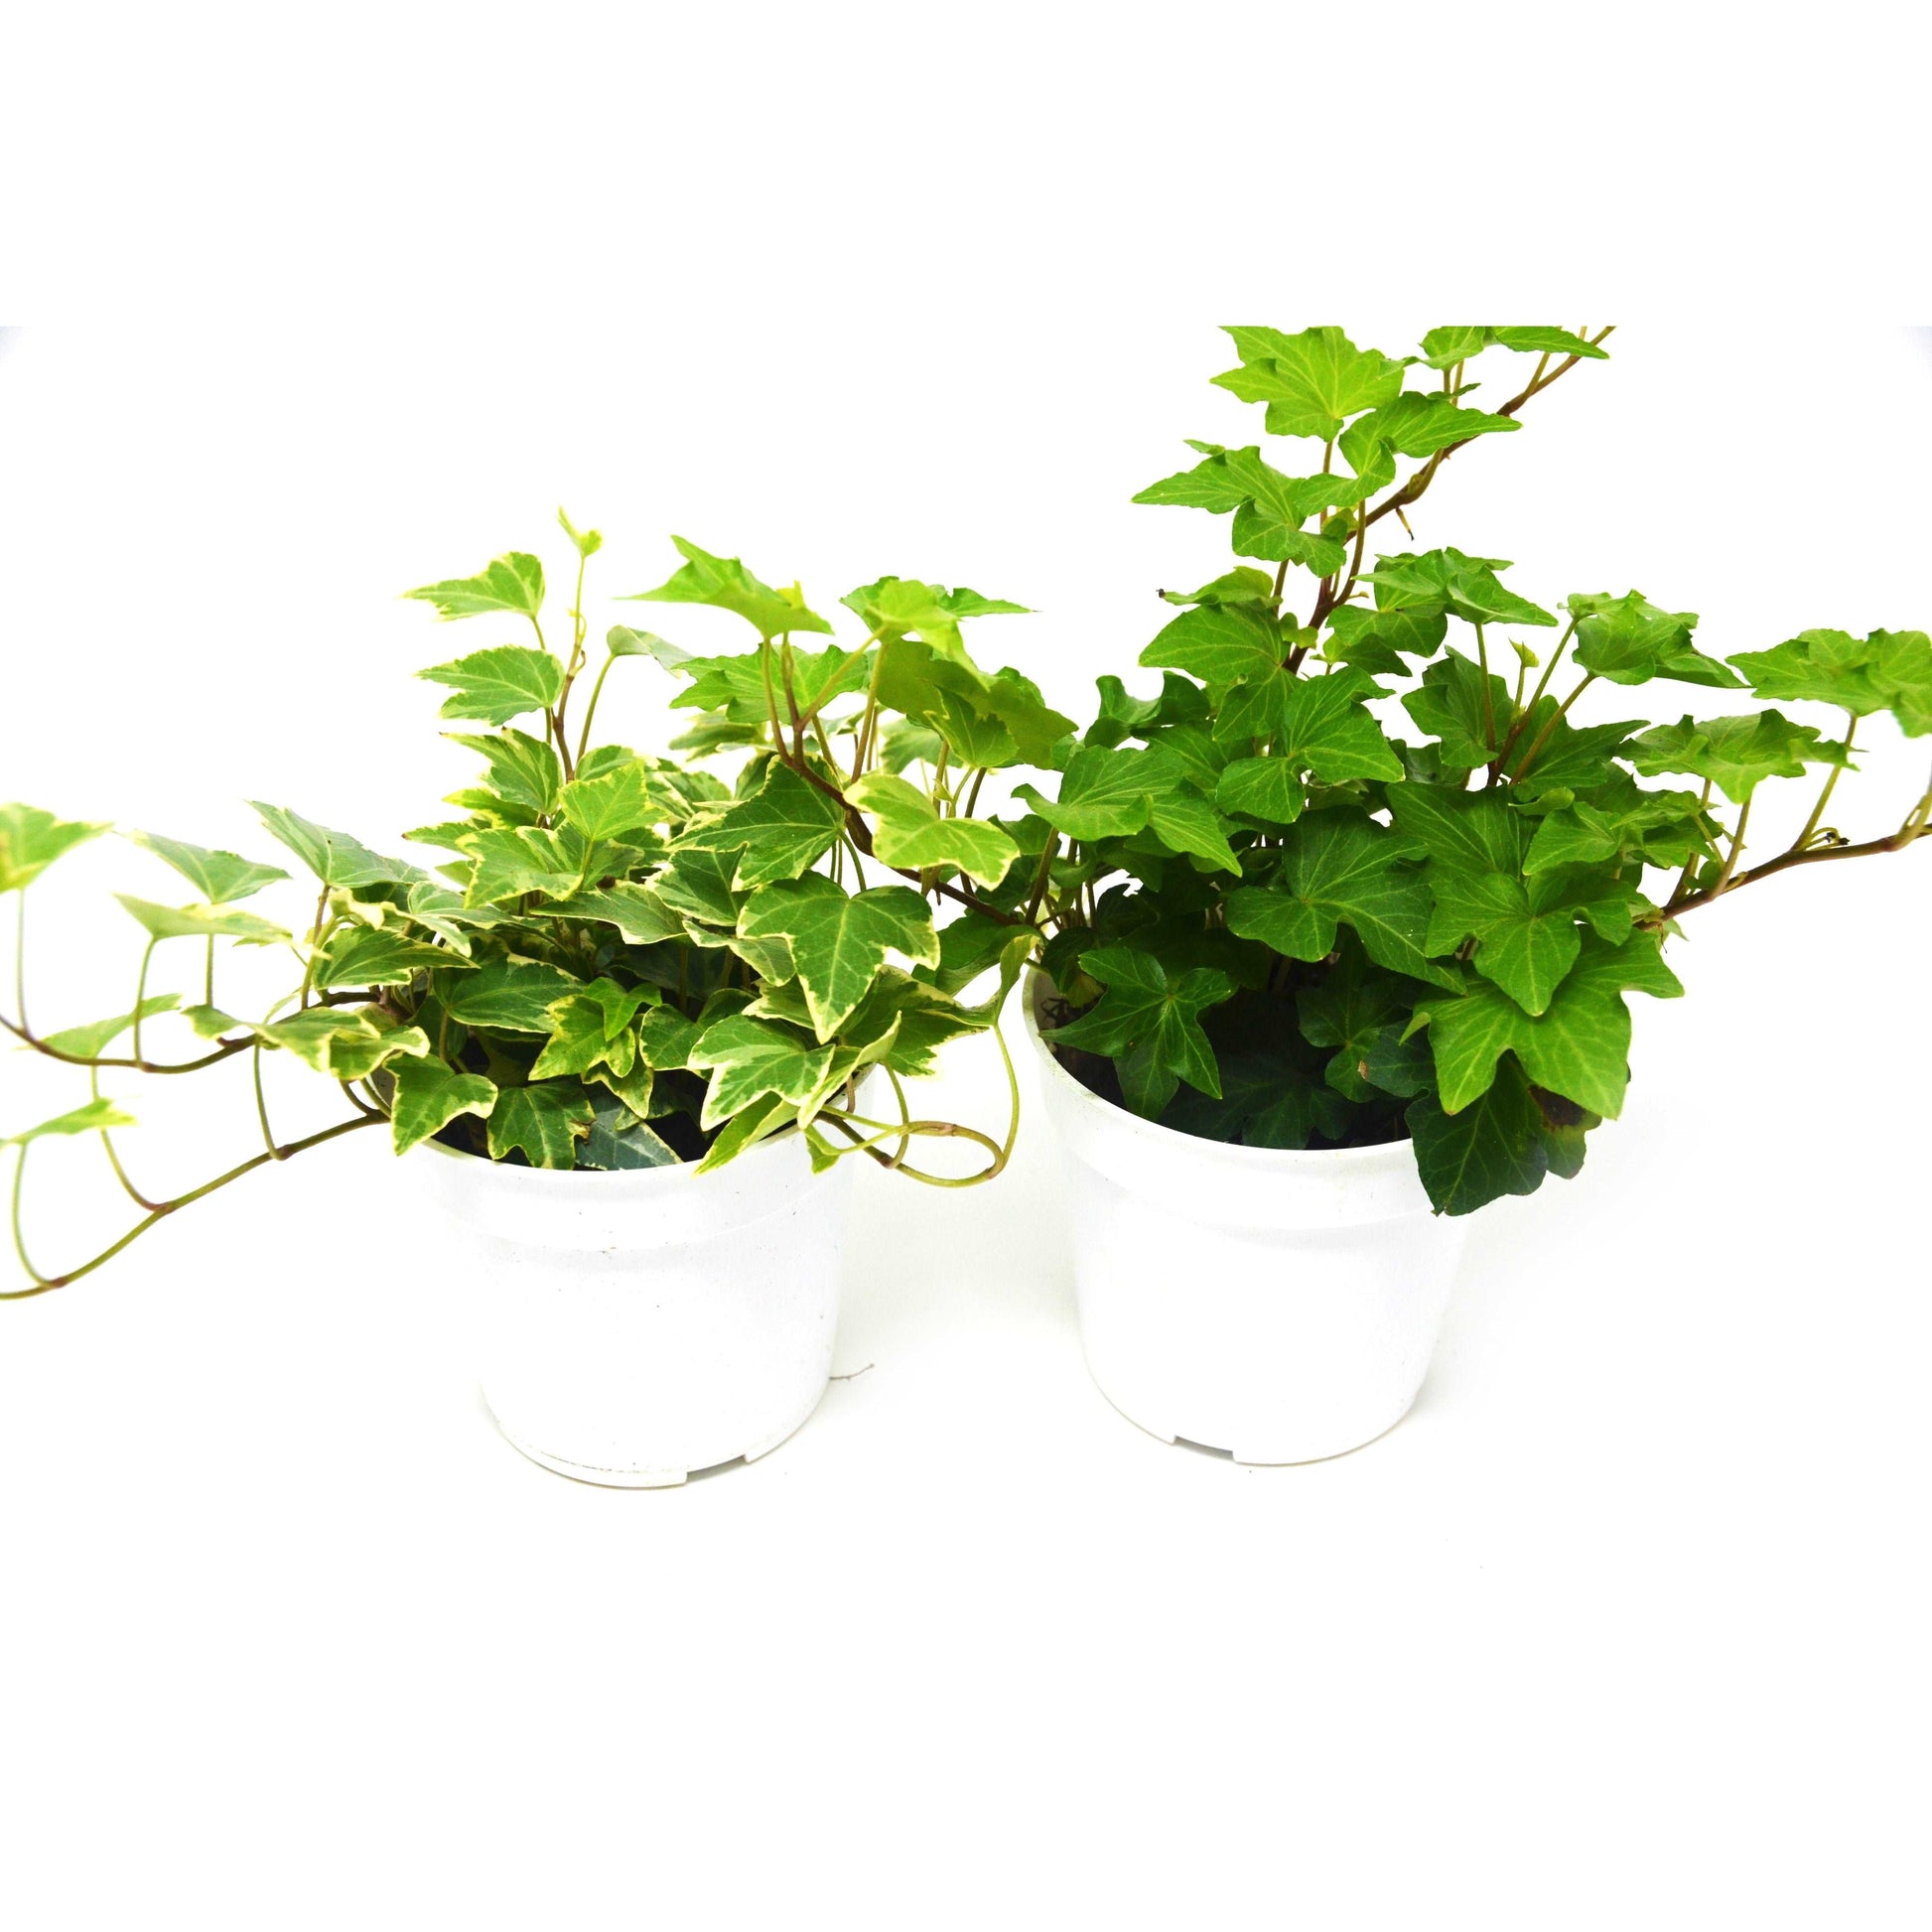 2 English Ivy Variety Pack - Live House Plant - FREE Care Guide - 4" Pot House Plant Shop